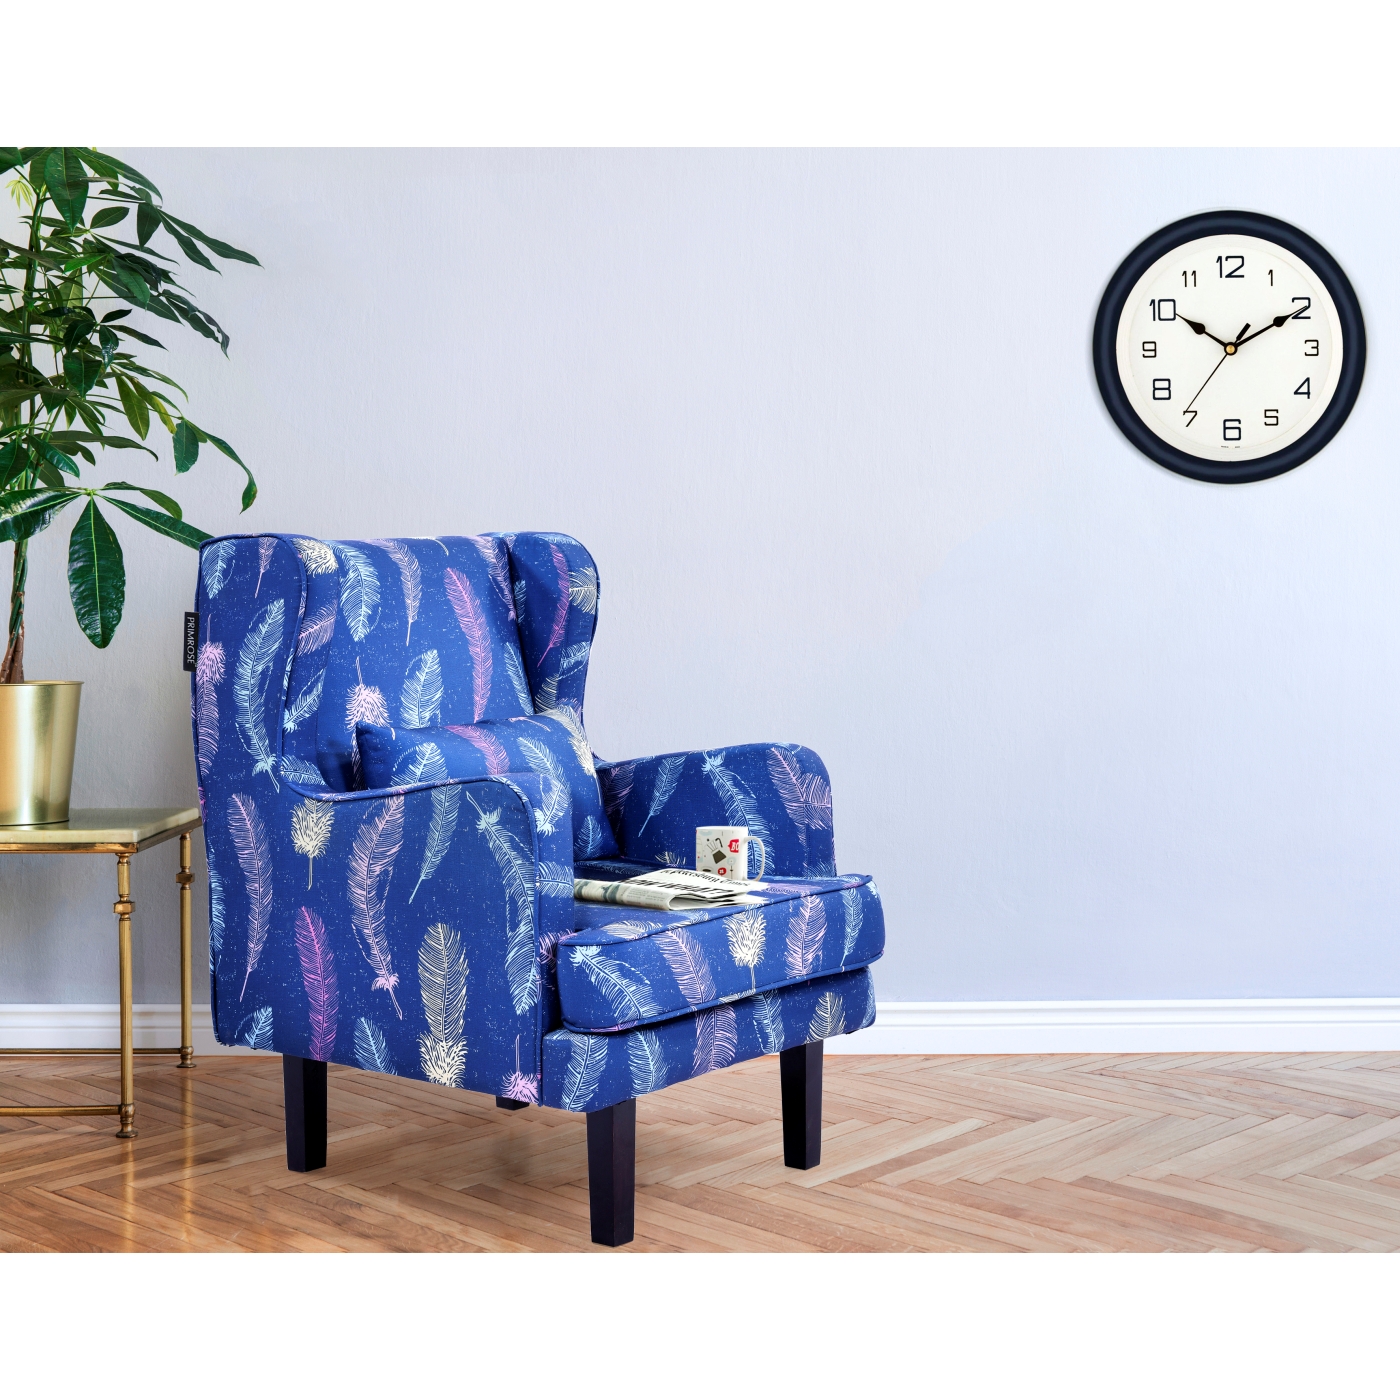 PRIMROSE Dream Feature Digital Printed Faux Linen Fabric High Back Wing Chair - Blue  